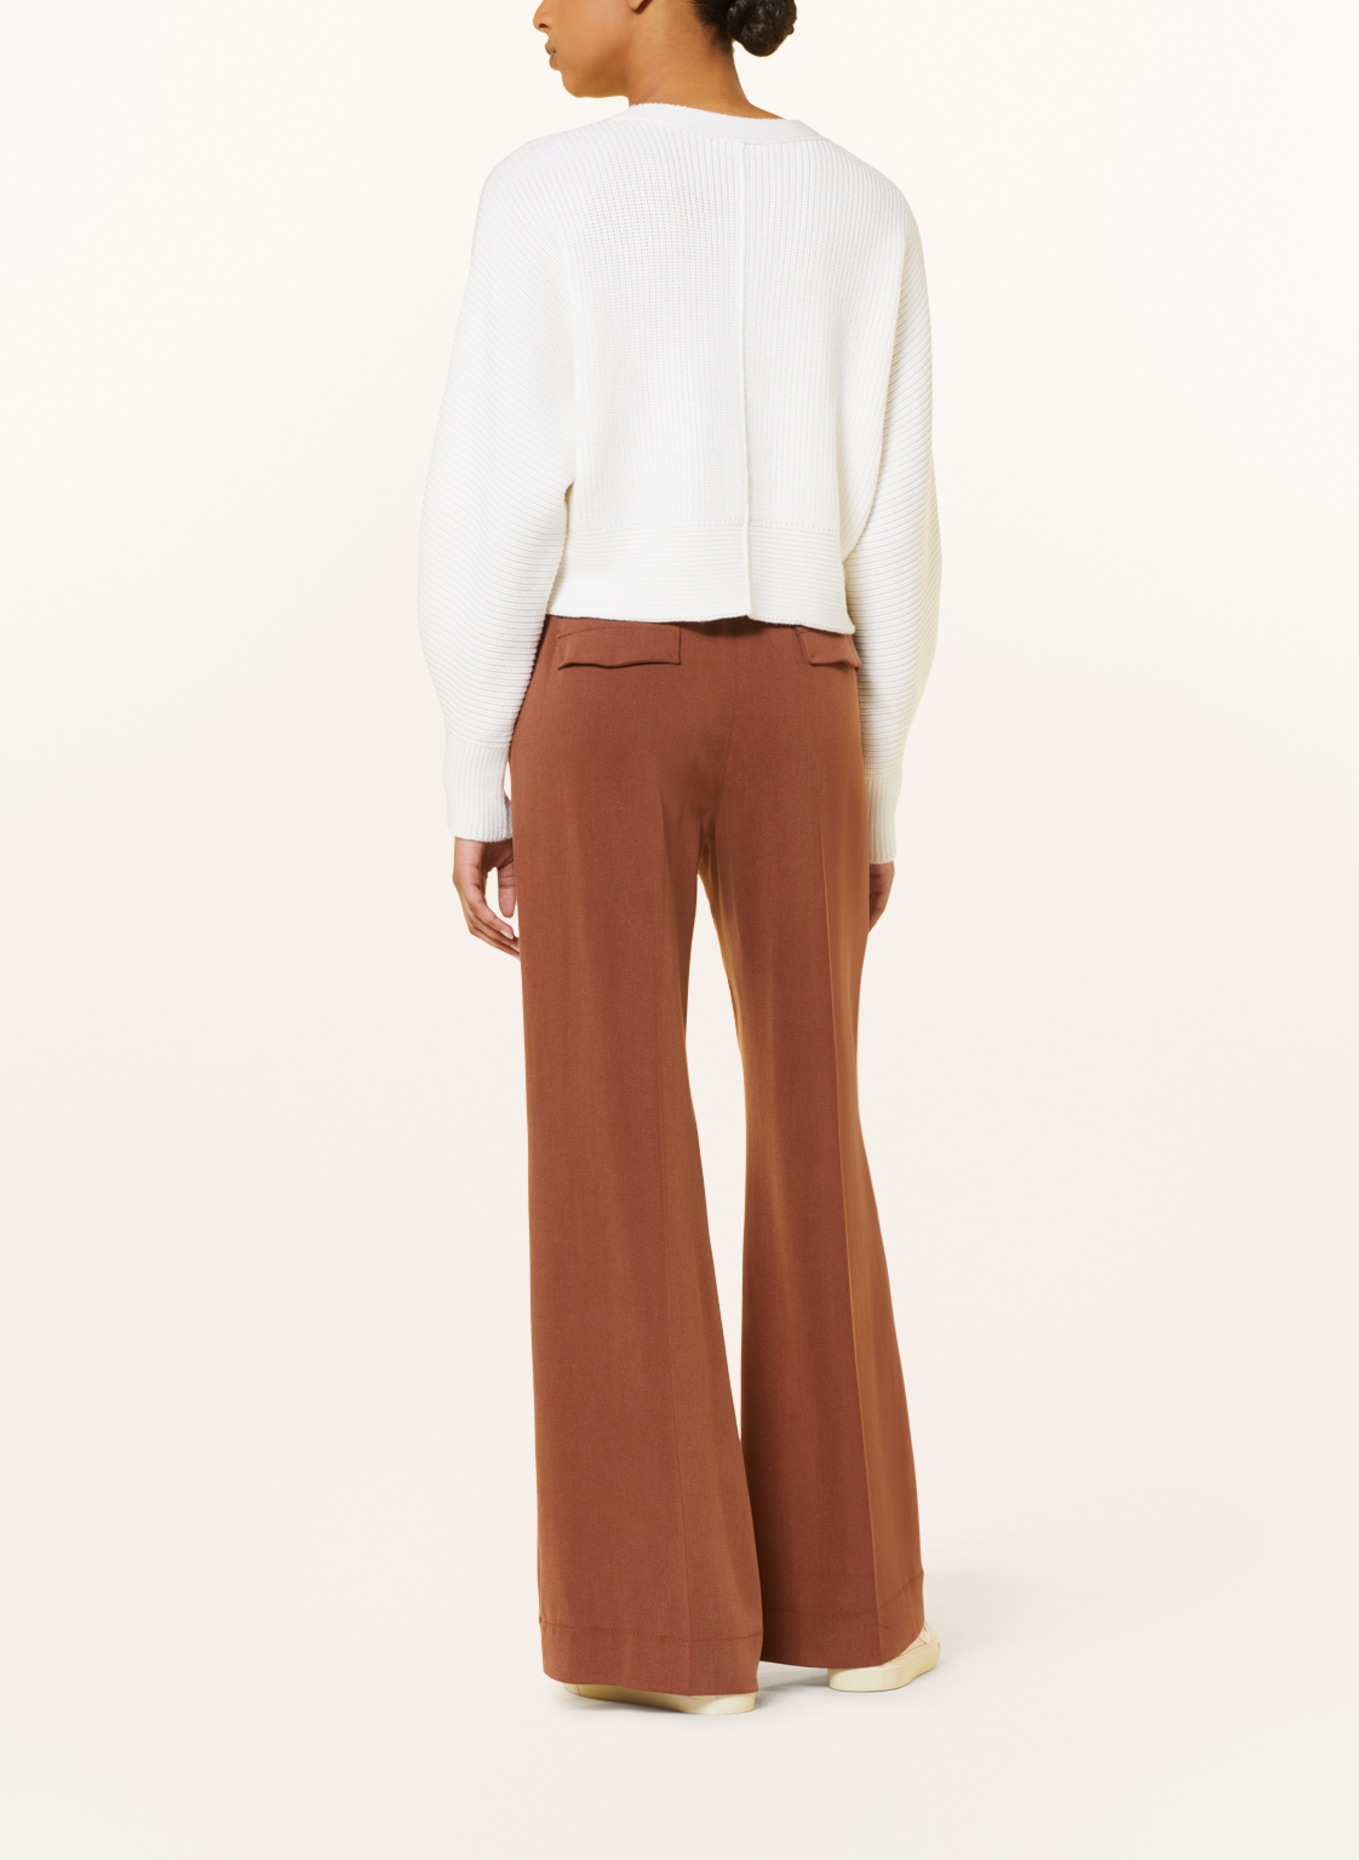 RIANI Cropped sweater made of merino wool, Color: WHITE (Image 3)